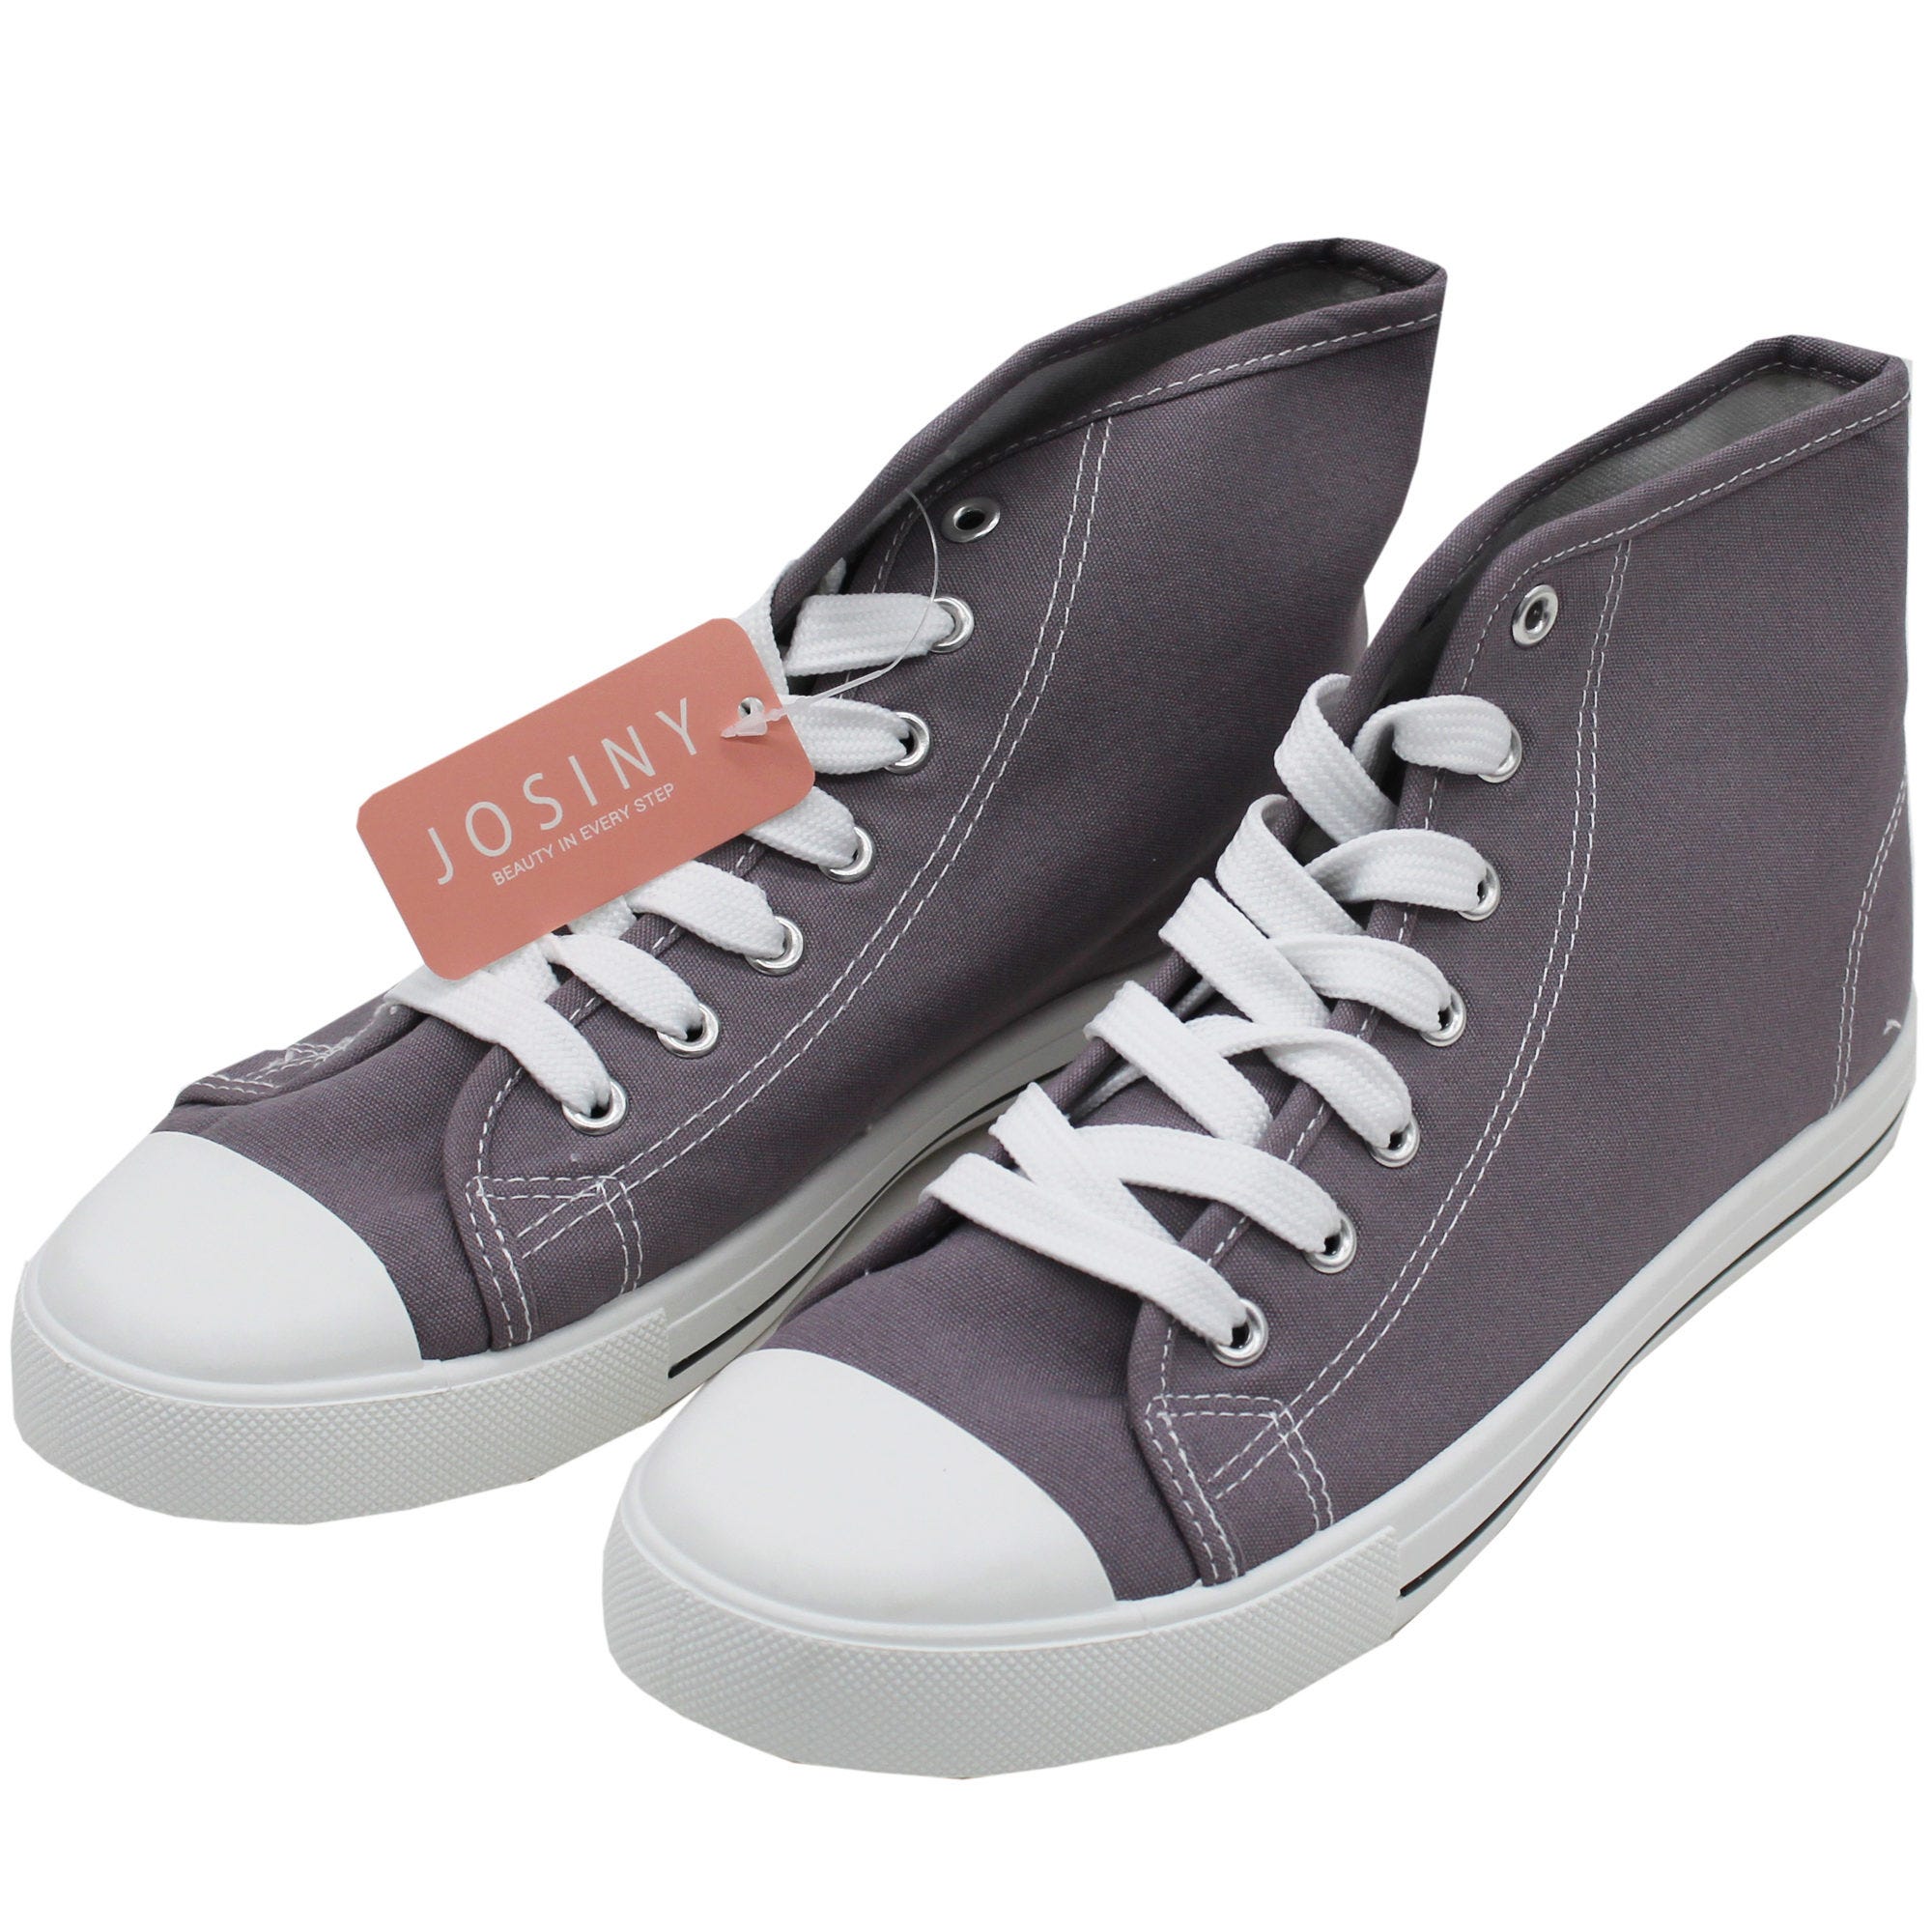 Women's Grey Mid-Top Sneaker SHOES in Assorted Sizes - Qty 6